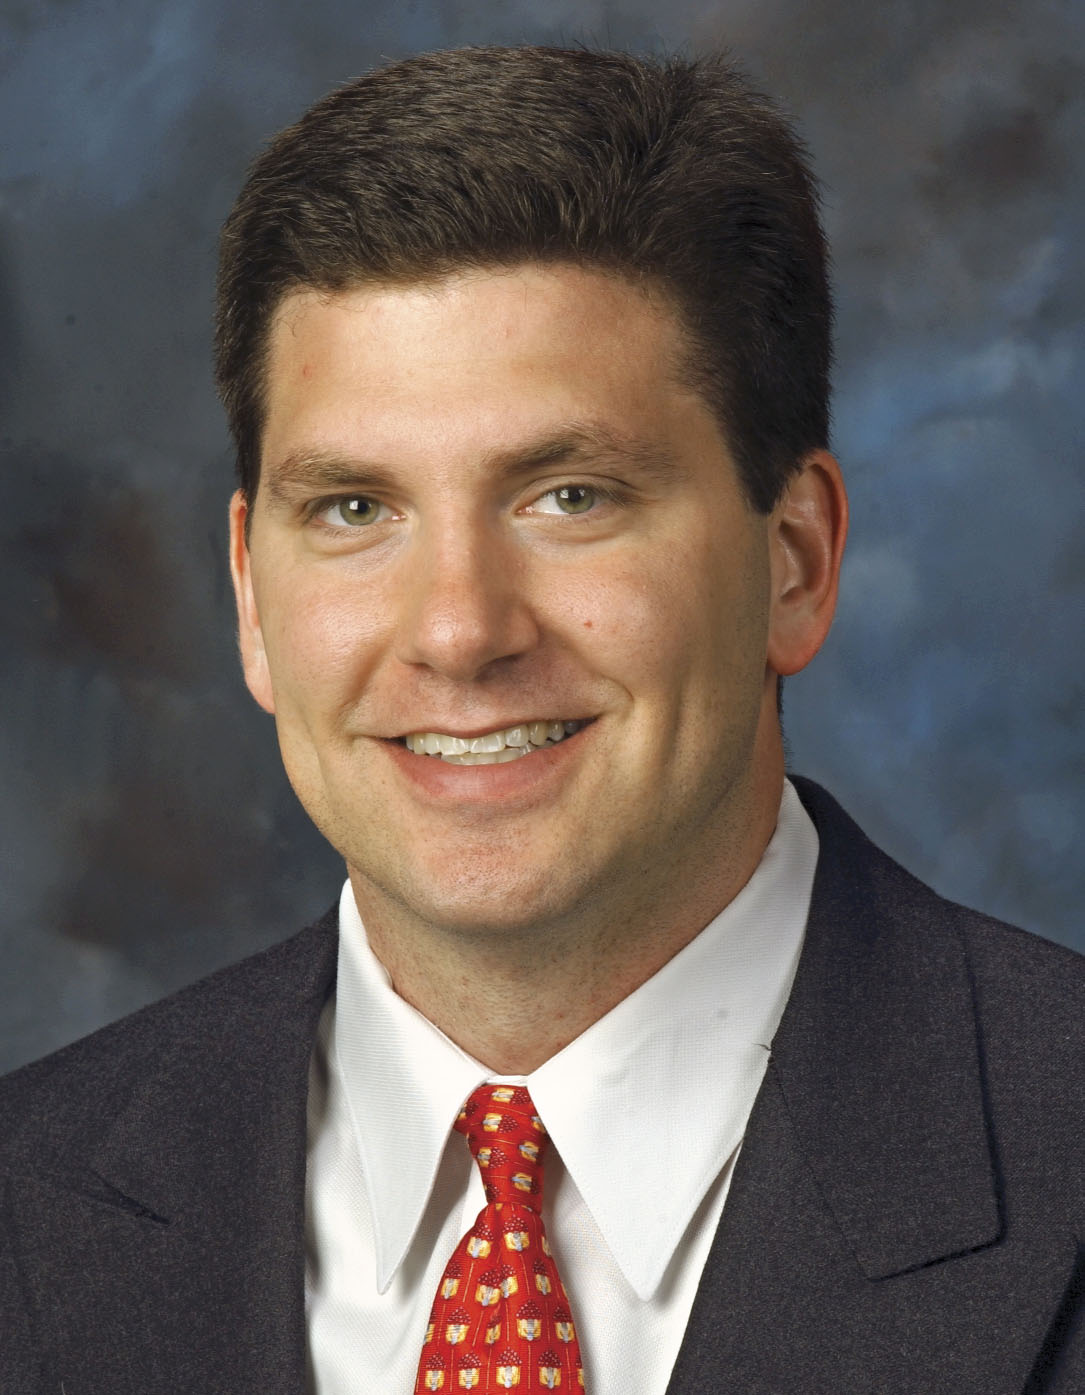 Dr. Anthony Rinella discusses challenges in spine surgery